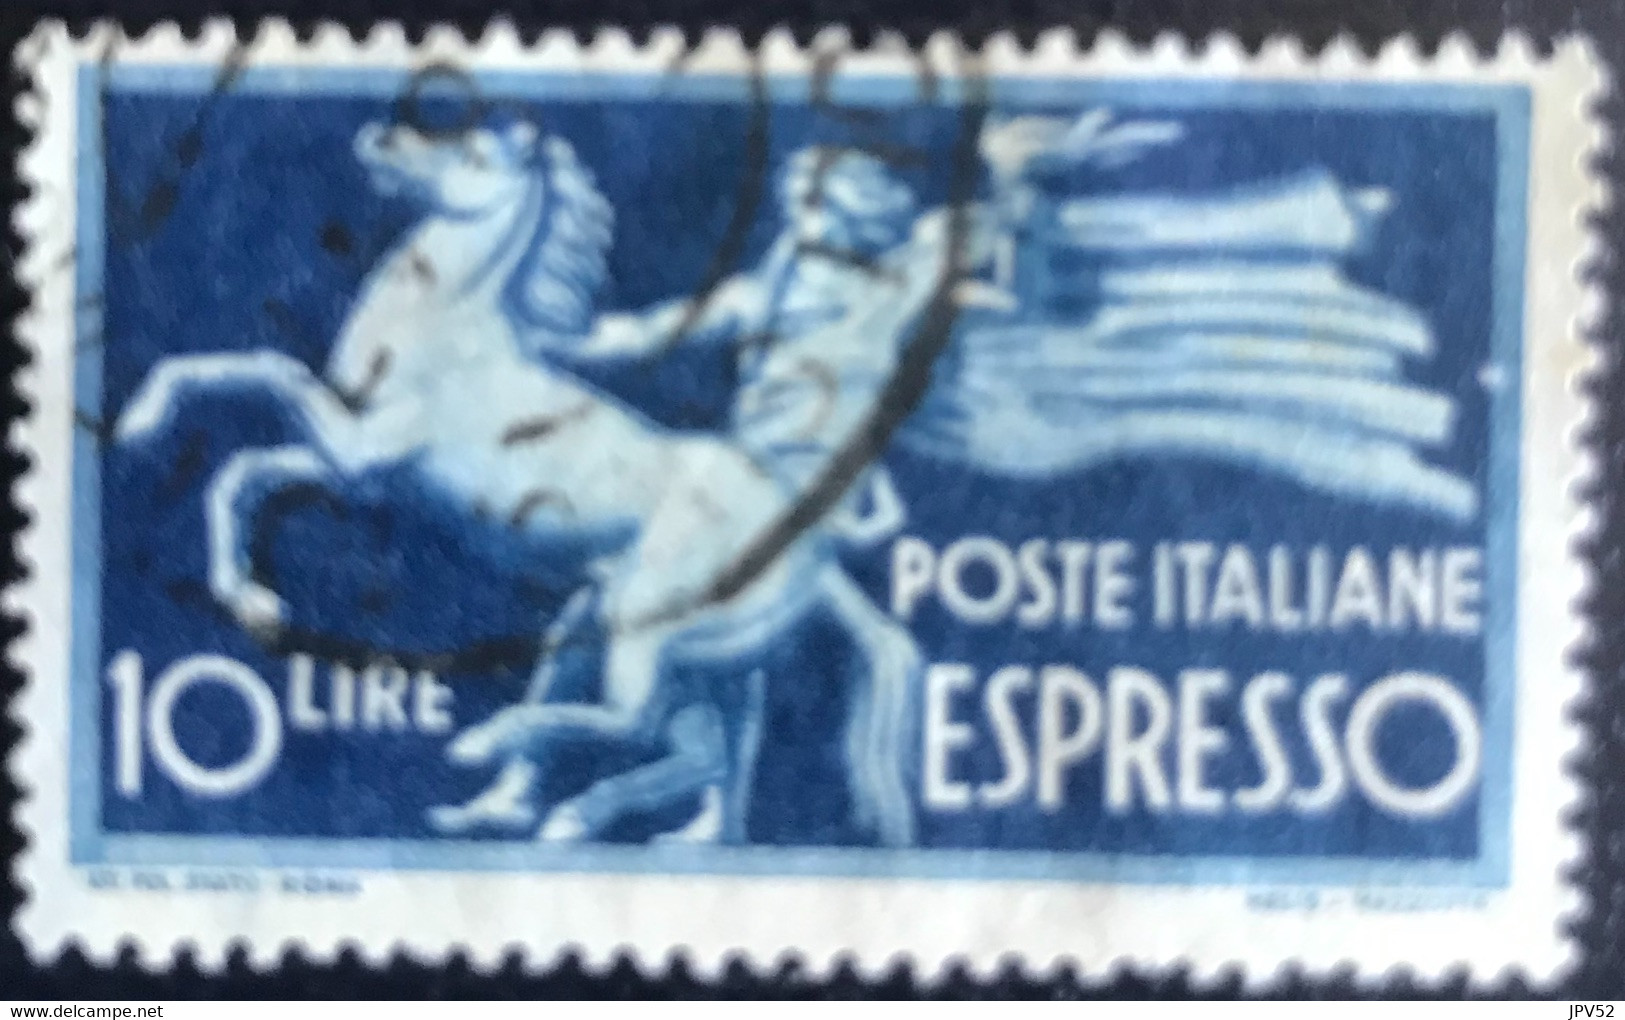 Italia - Italy - T2/13 - (°)used - 1945 - Michel 716 - Expresso - Express Mail